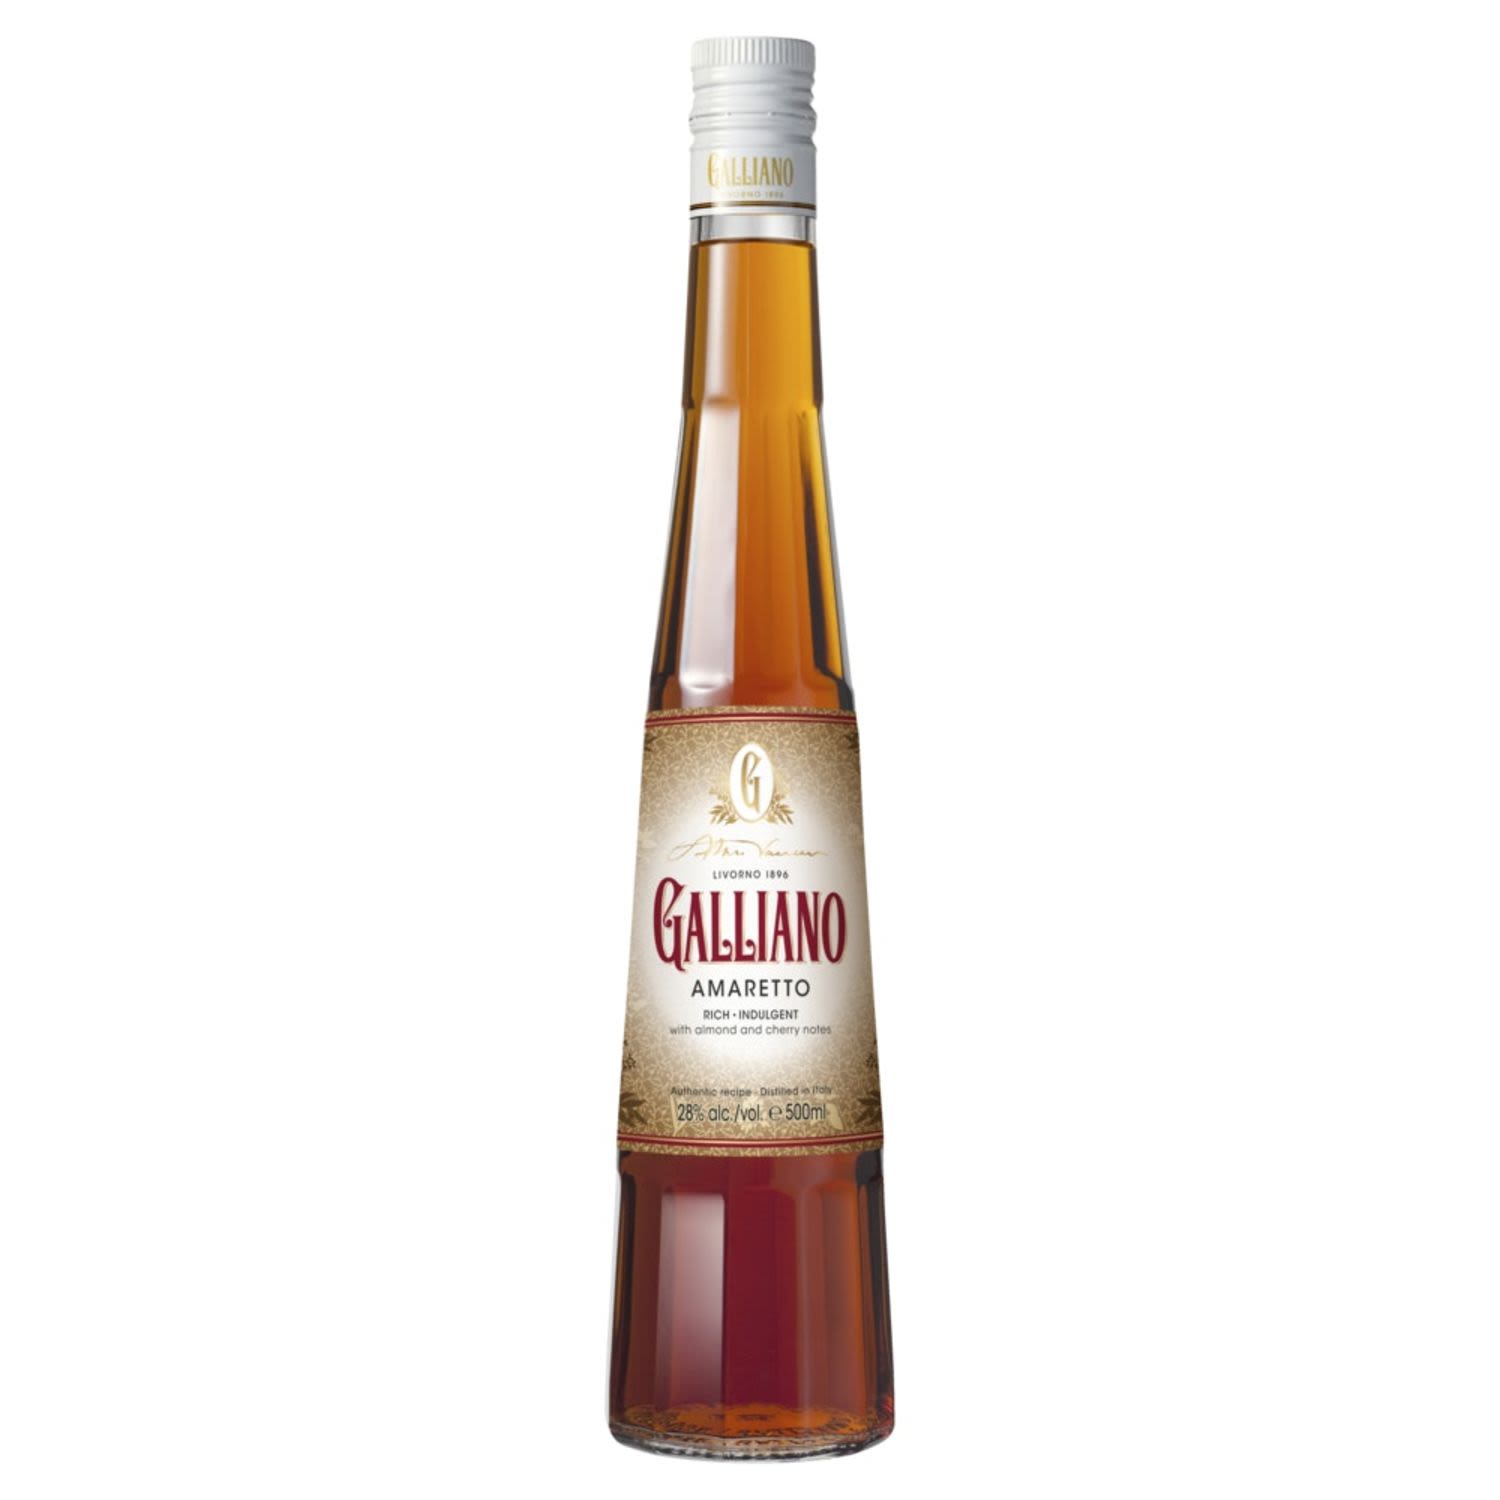 A bottle of Galliano begins it’s life with the meticulous sorting and quality control of some 30 herbs, spices and plant extracts. This creates a perfectly balanced hand crafted artisanal spirit.<br /> <br />Alcohol Volume: 28.00%<br /><br />Pack Format: Bottle<br /><br />Standard Drinks: 11</br /><br />Pack Type: Bottle<br /><br />Country of Origin: Italy<br />